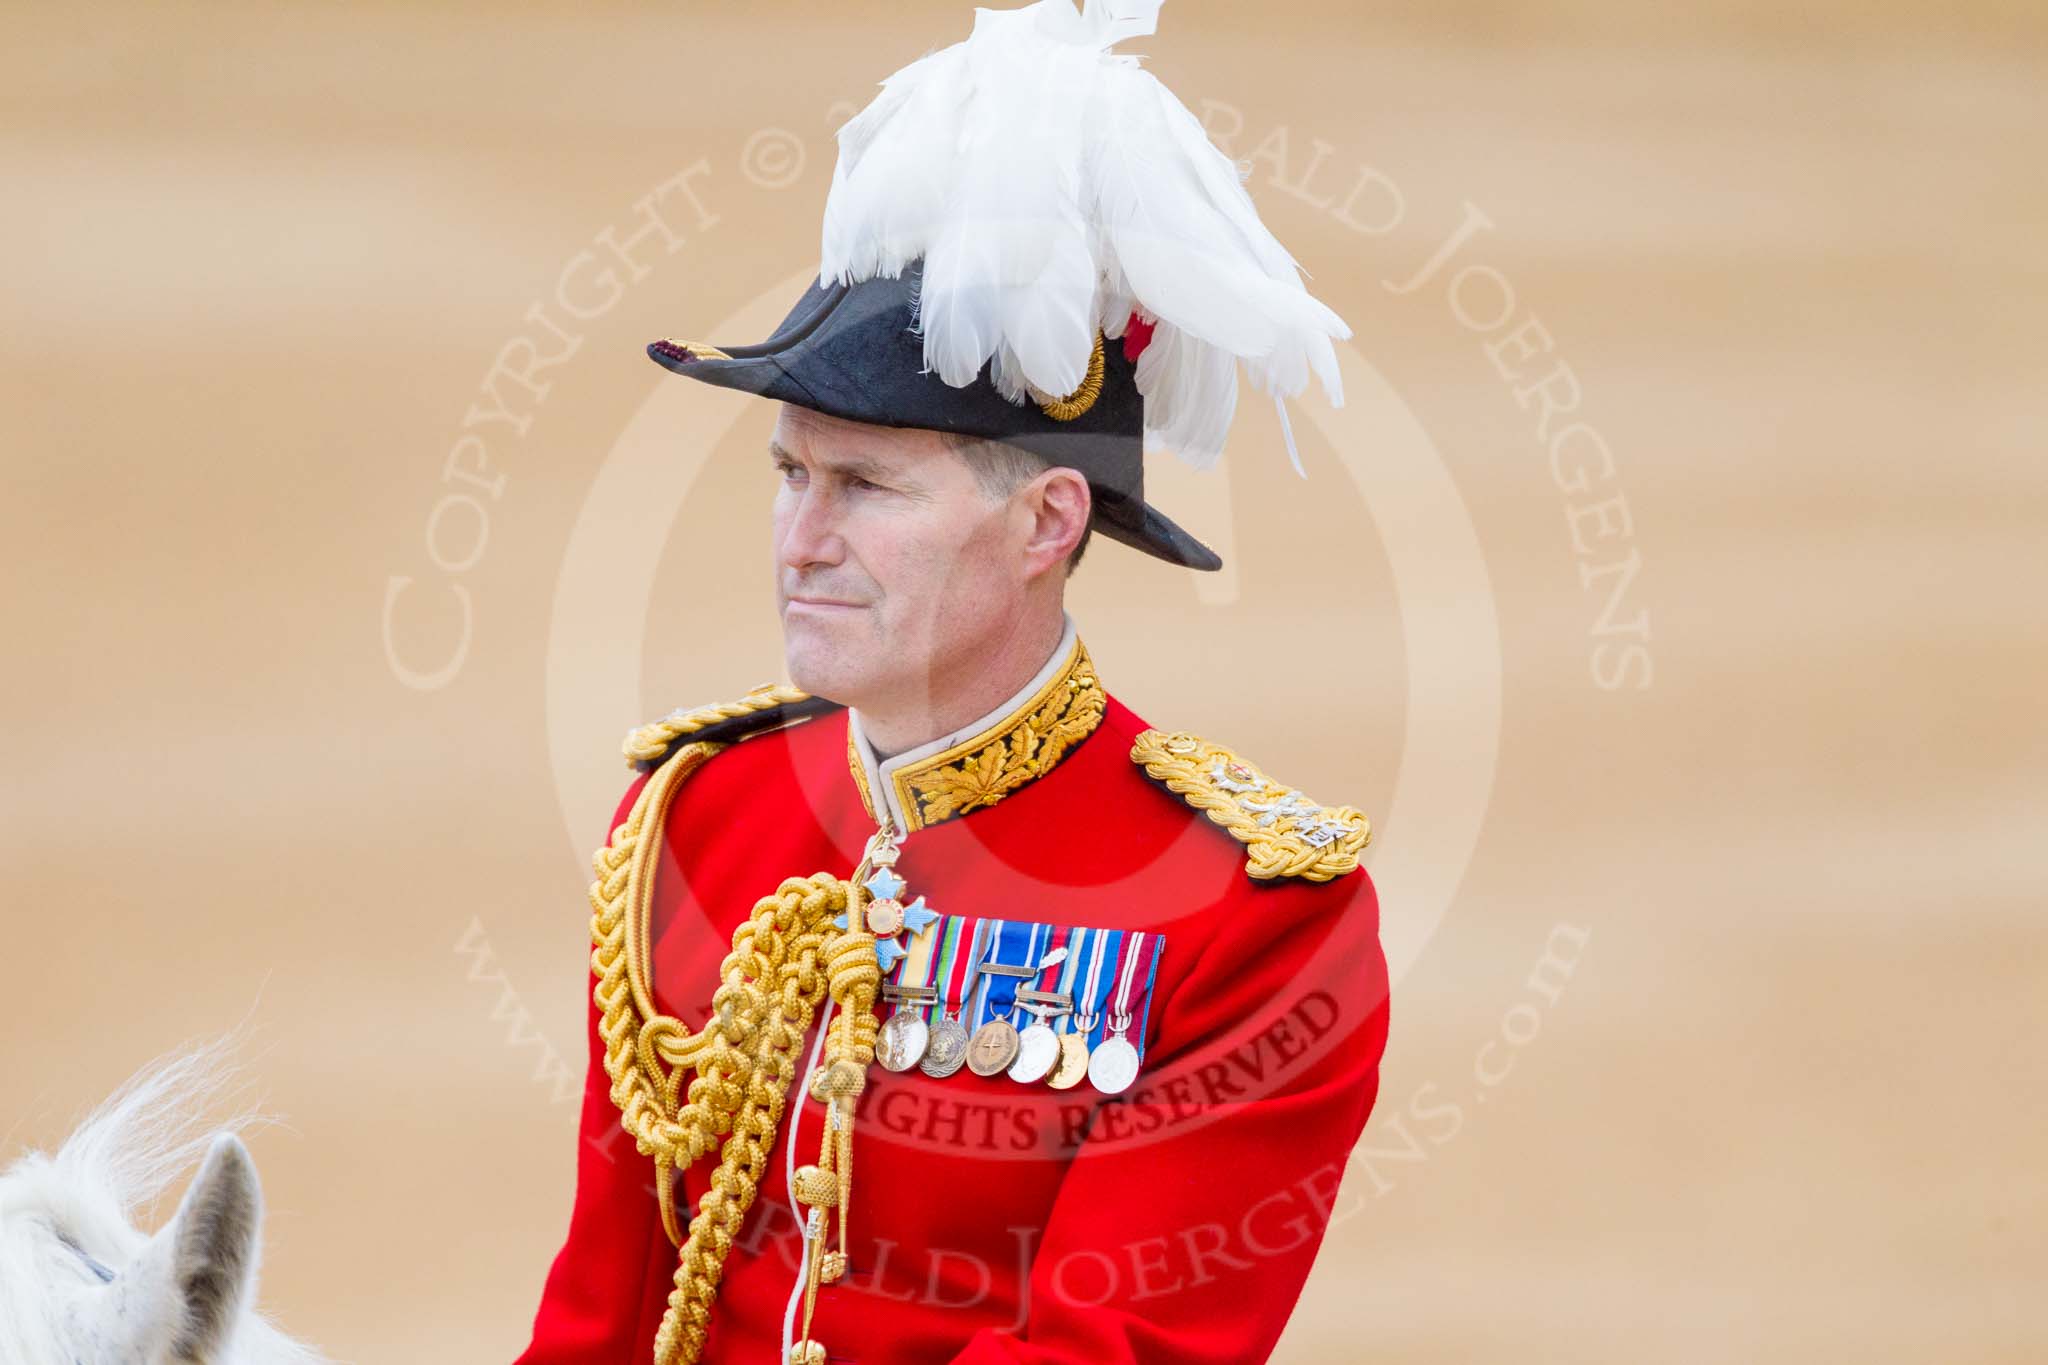 Trooping the Colour 2015.
Horse Guards Parade, Westminster,
London,

United Kingdom,
on 13 June 2015 at 11:01, image #270